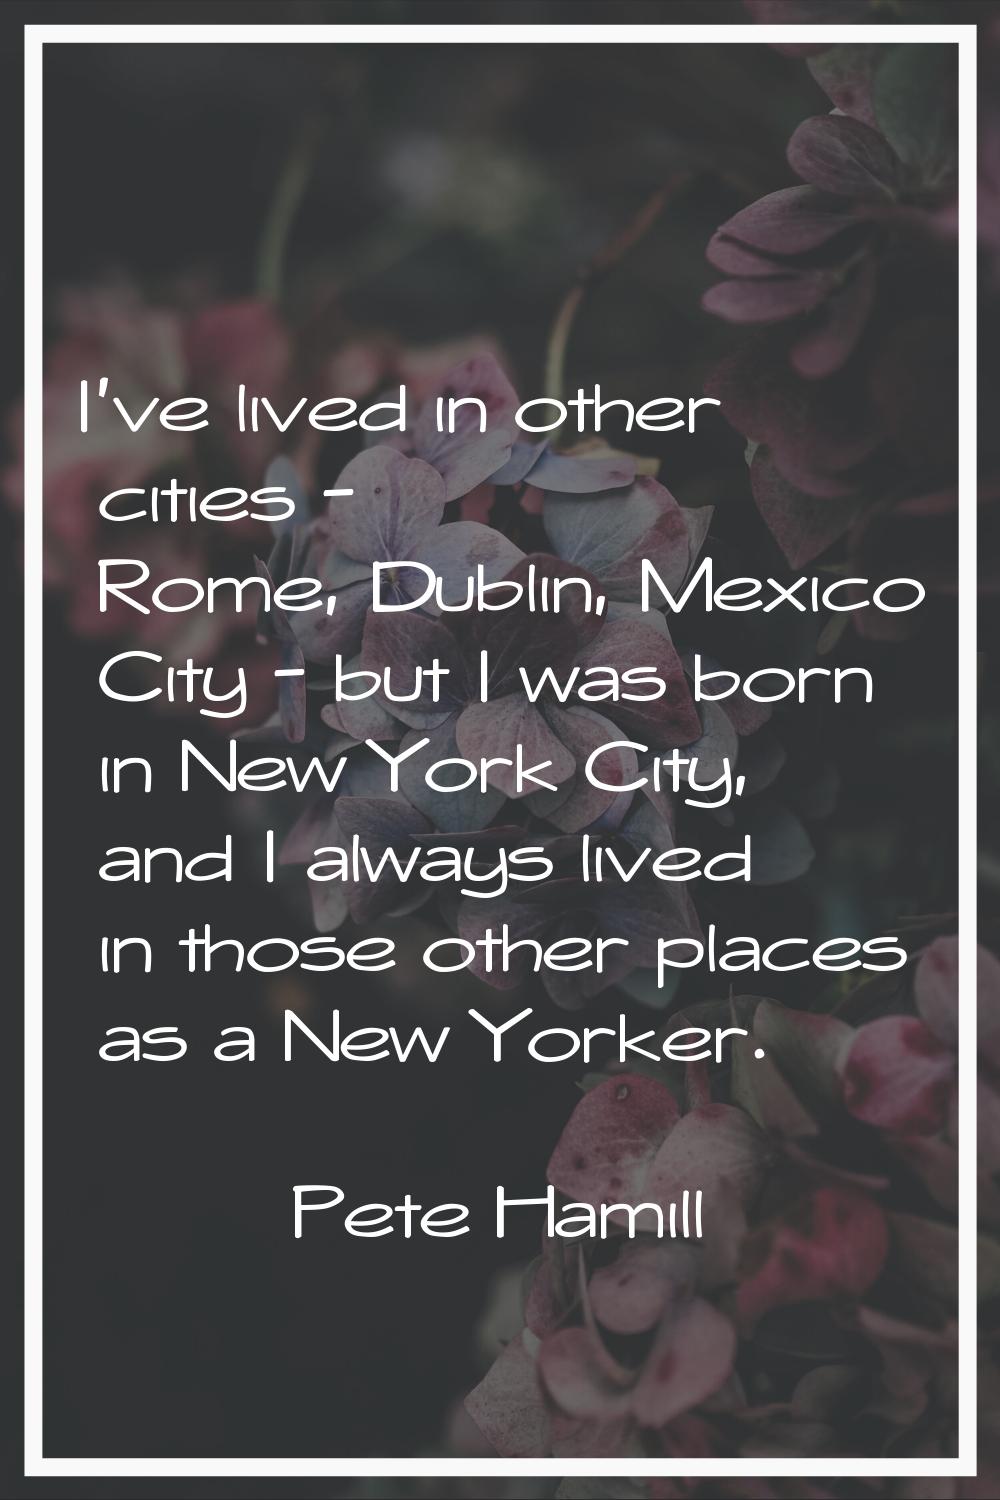 I've lived in other cities - Rome, Dublin, Mexico City - but I was born in New York City, and I alw